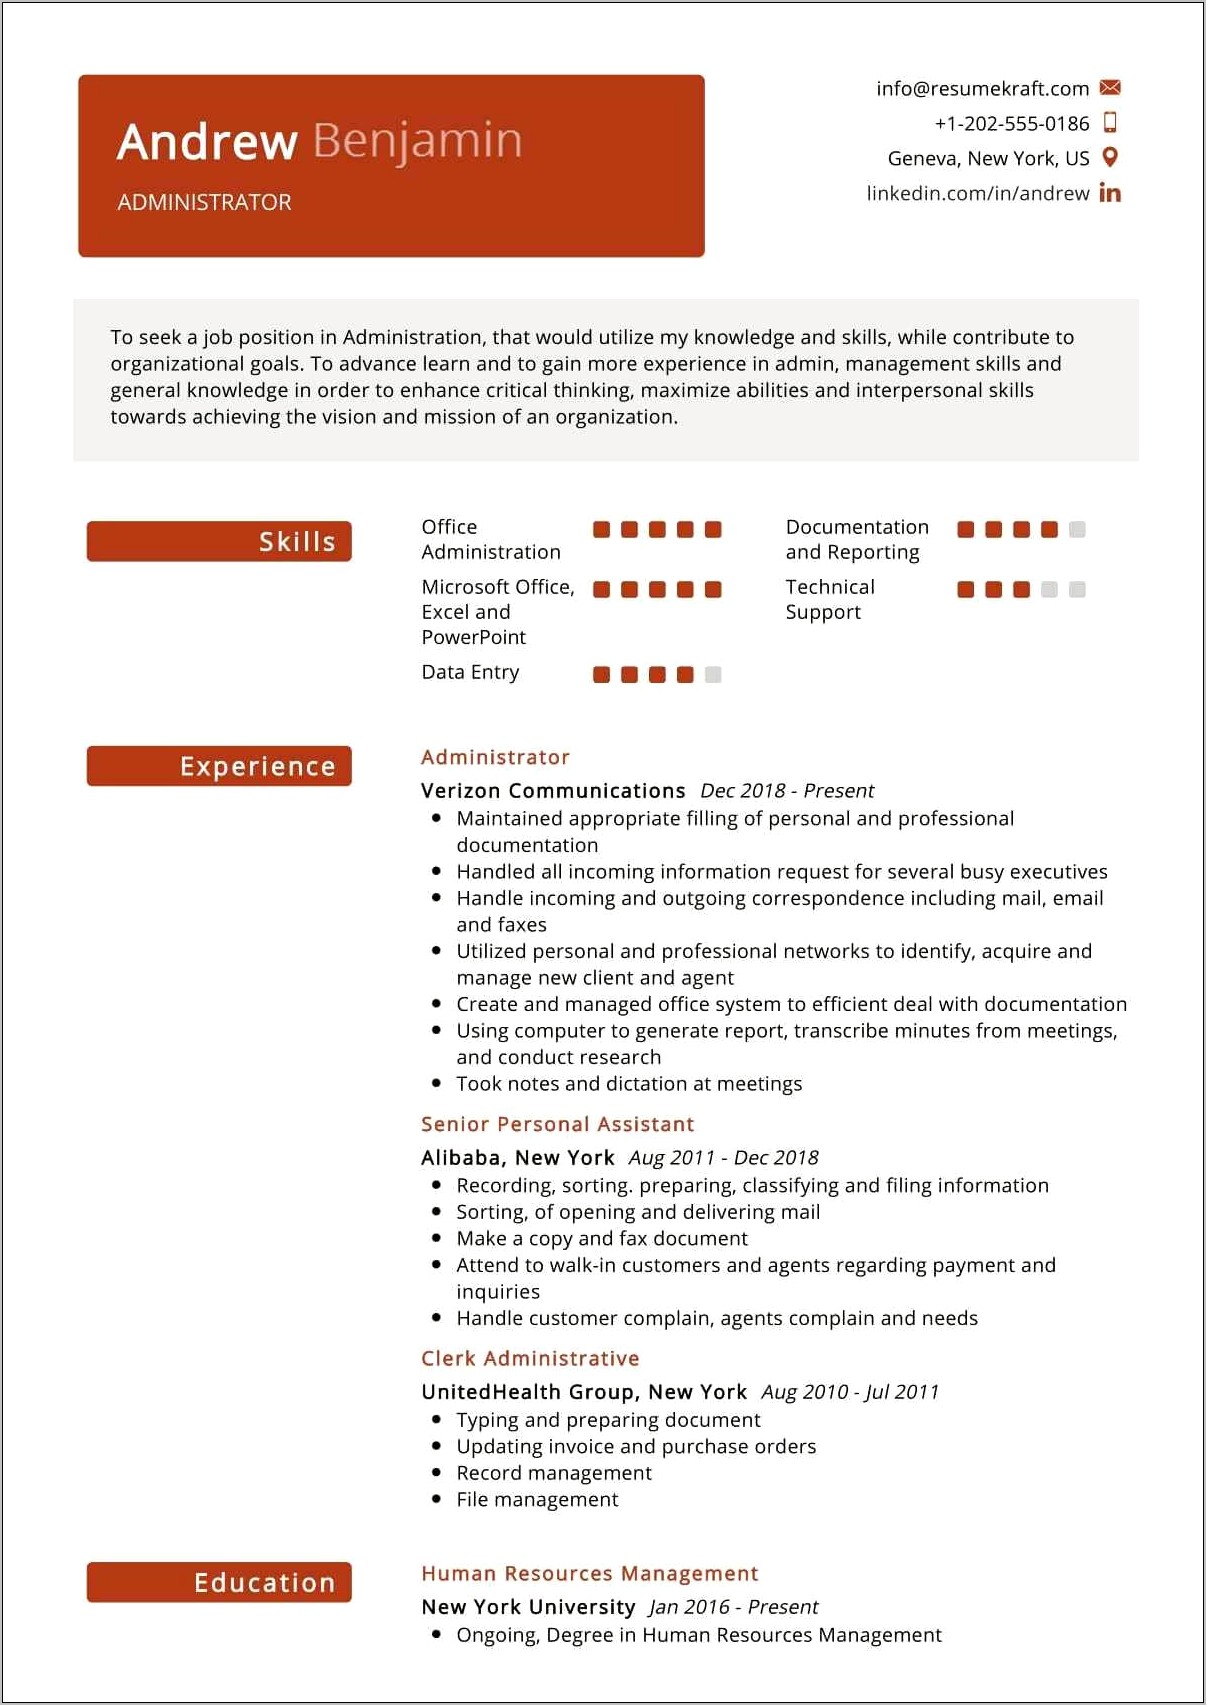 Resume Samples For Administrative Jobs